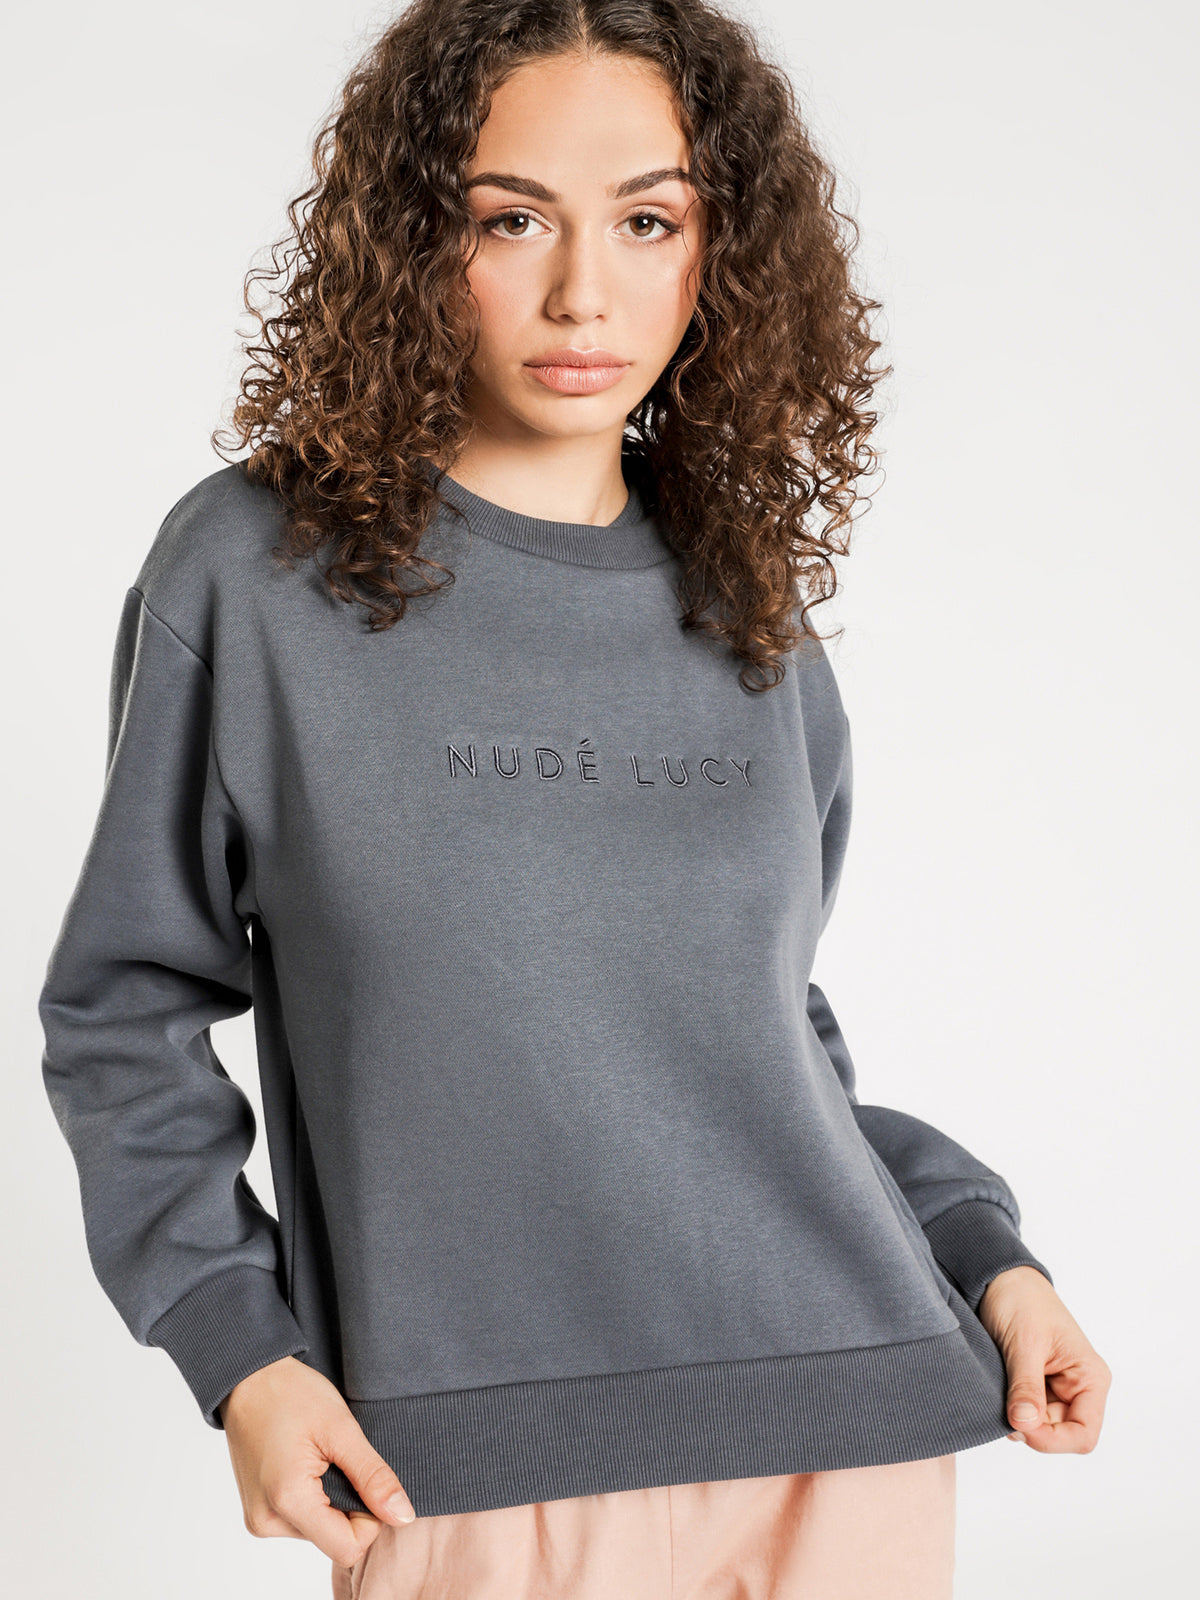 Nude Lucy Slogan Sweat in Navy